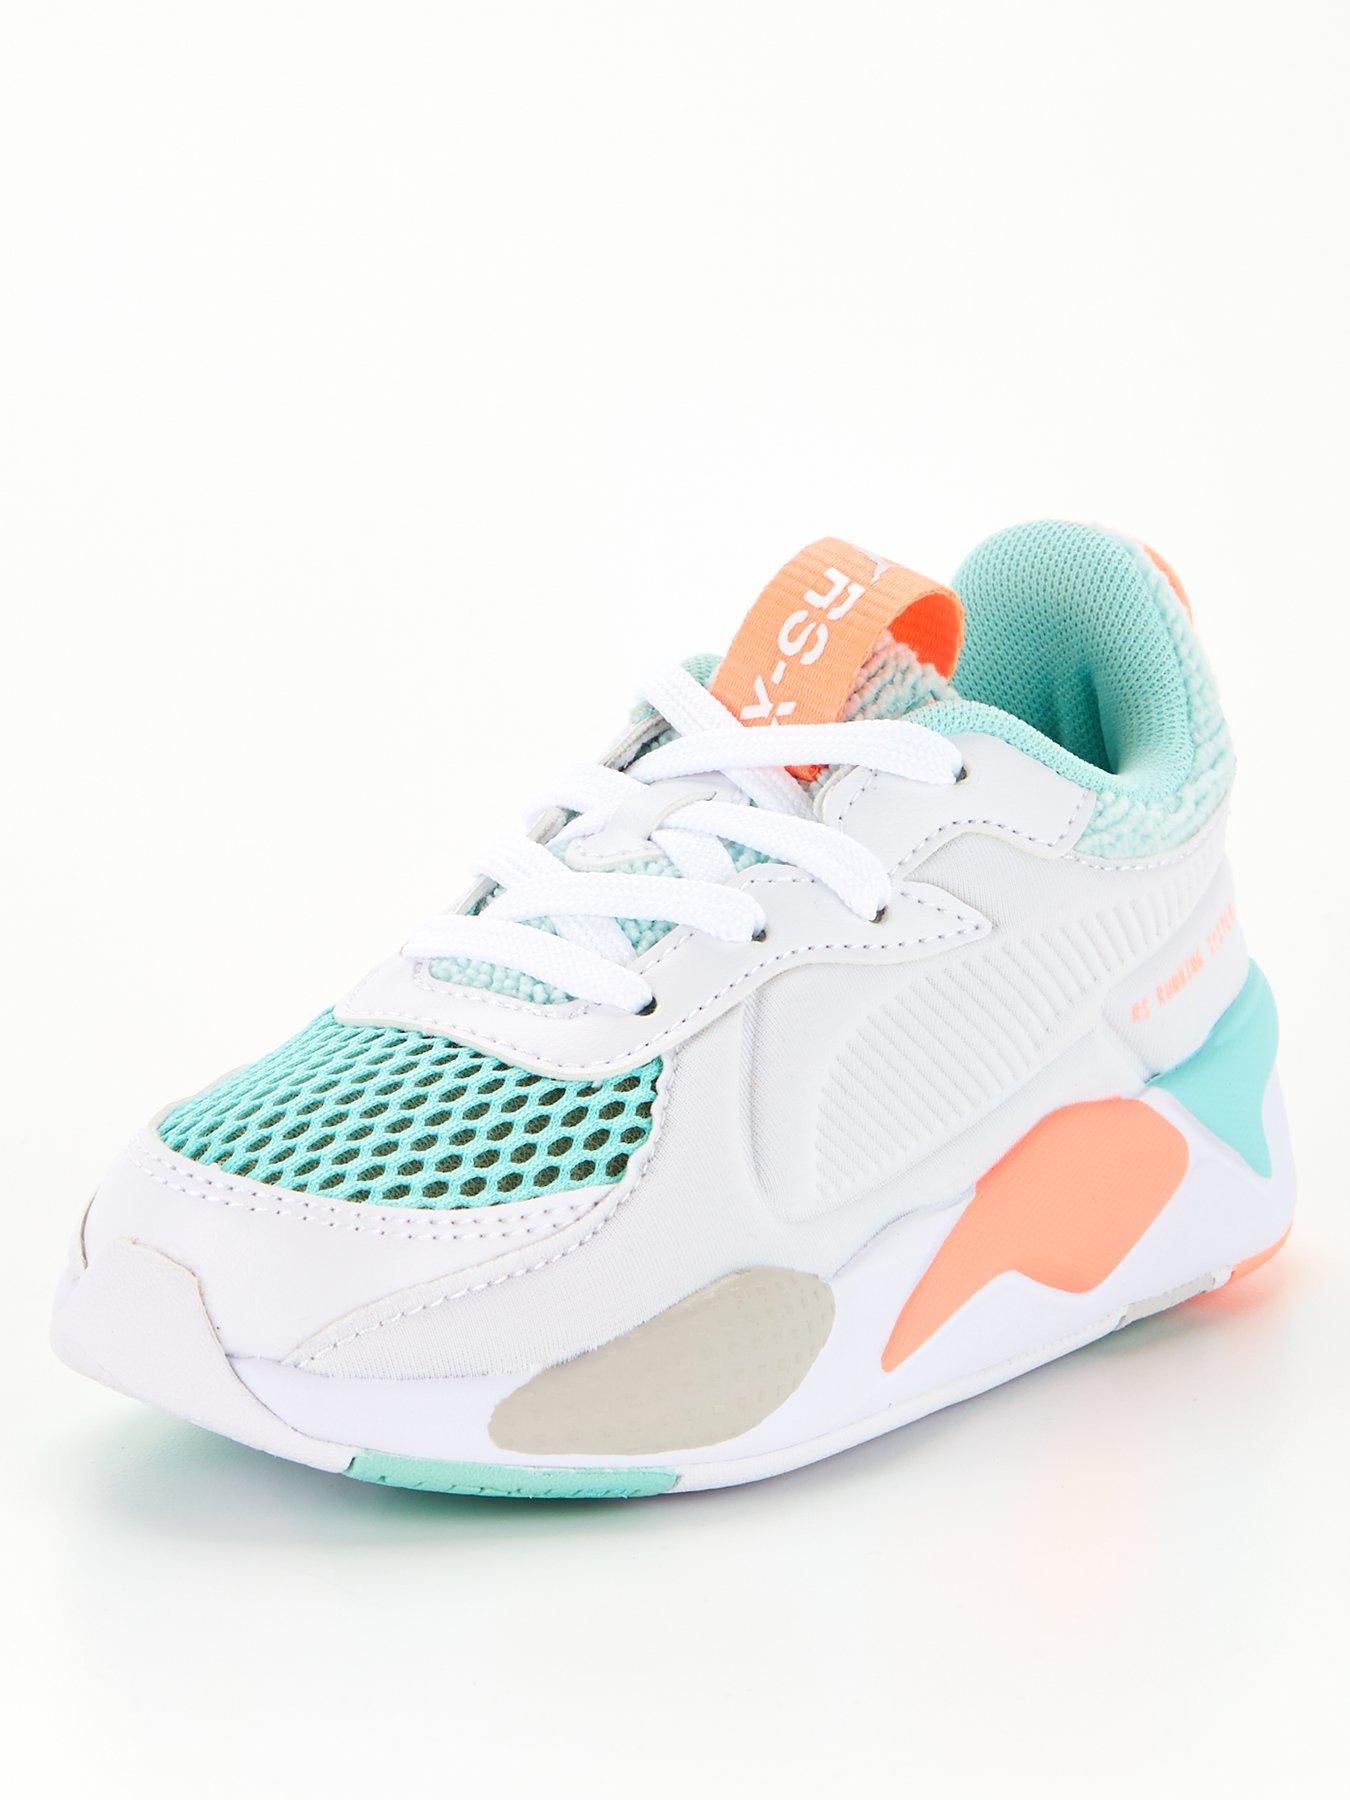 Puma Rs X Soft Case Childrens Trainers White Multi Very Co Uk